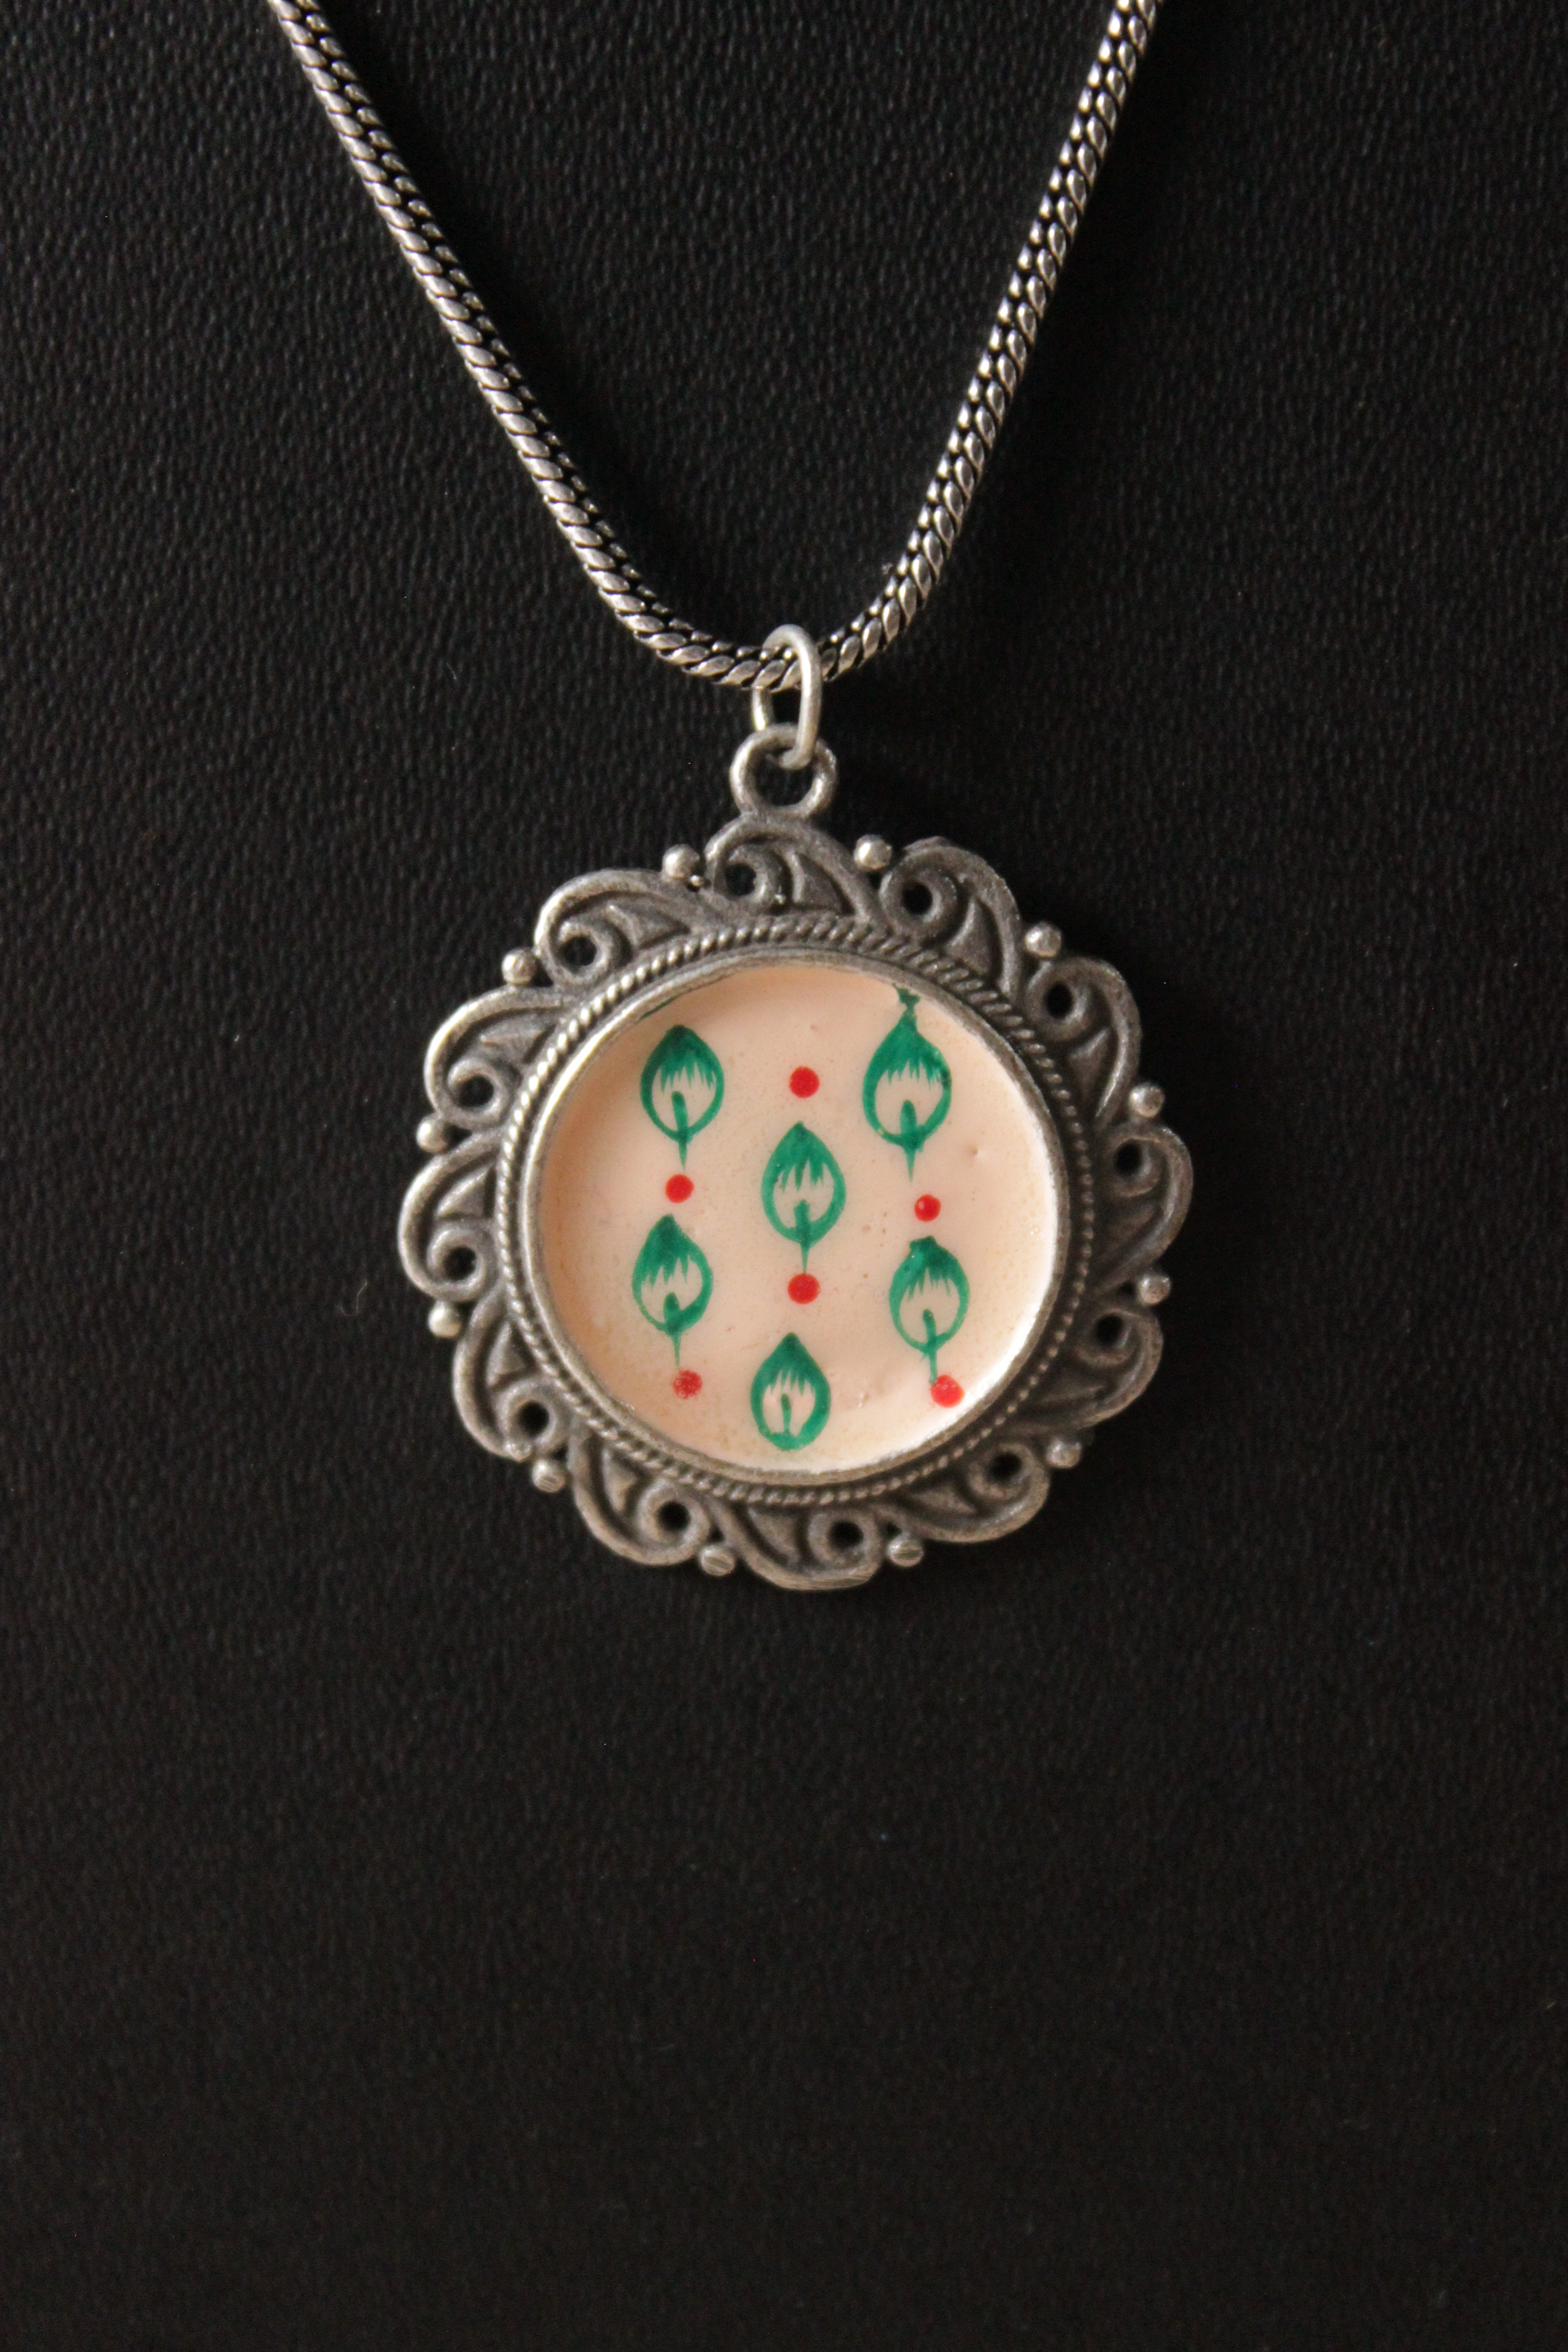 Oxidised Silver Finish Hand Painted Pendant Chain Necklace